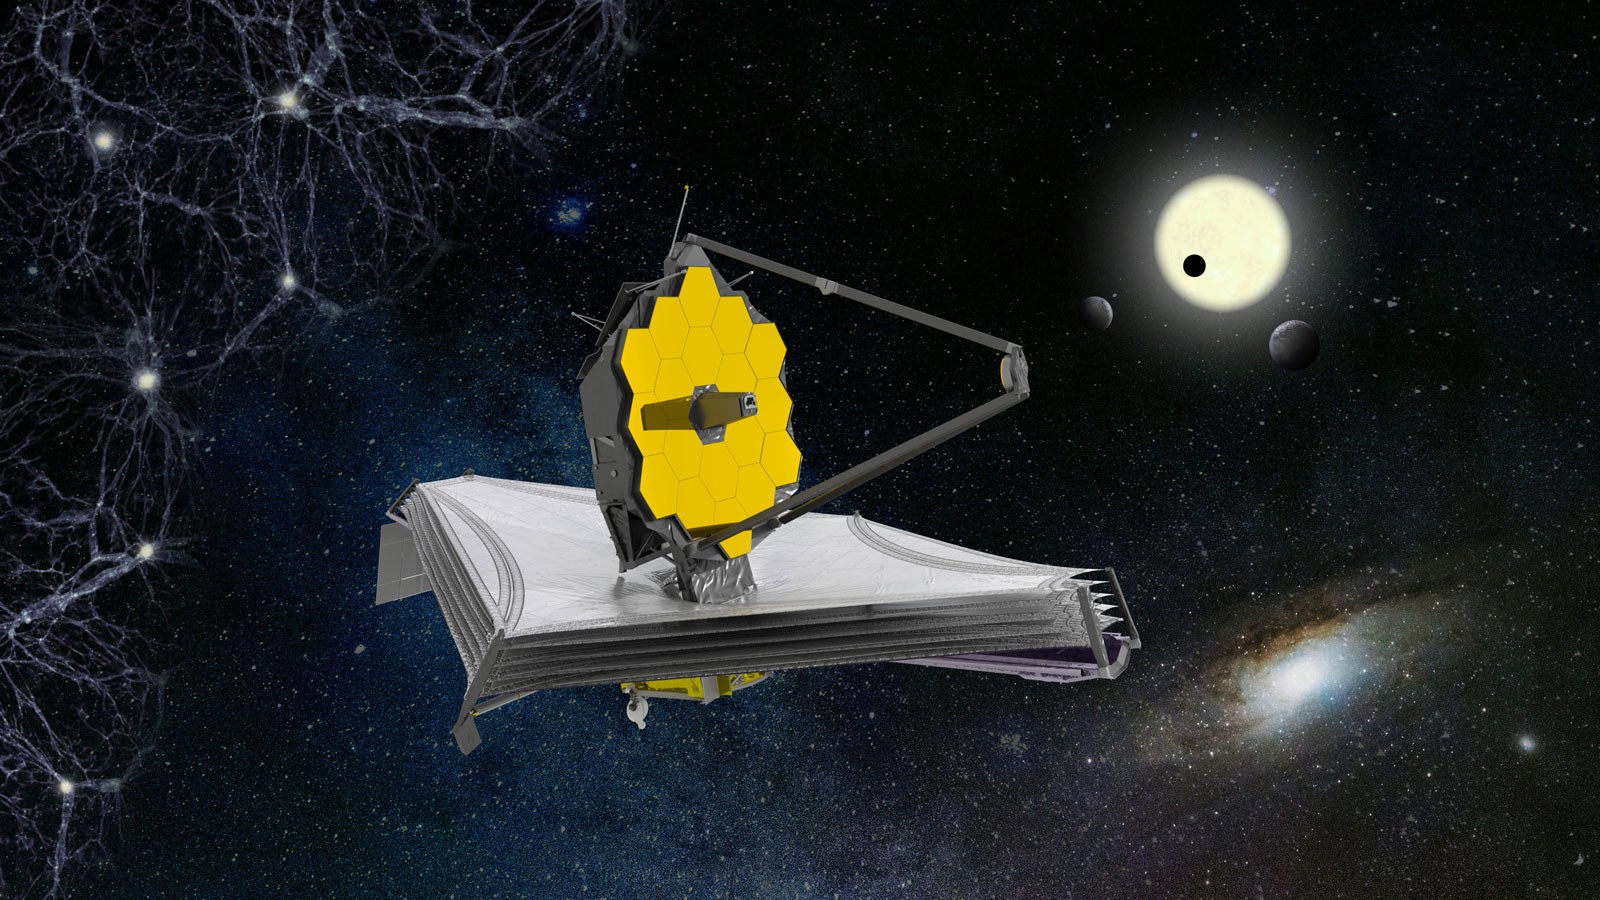 Consider Your Insignificance While Gazing at JWST’s First Picture of the Cosmos